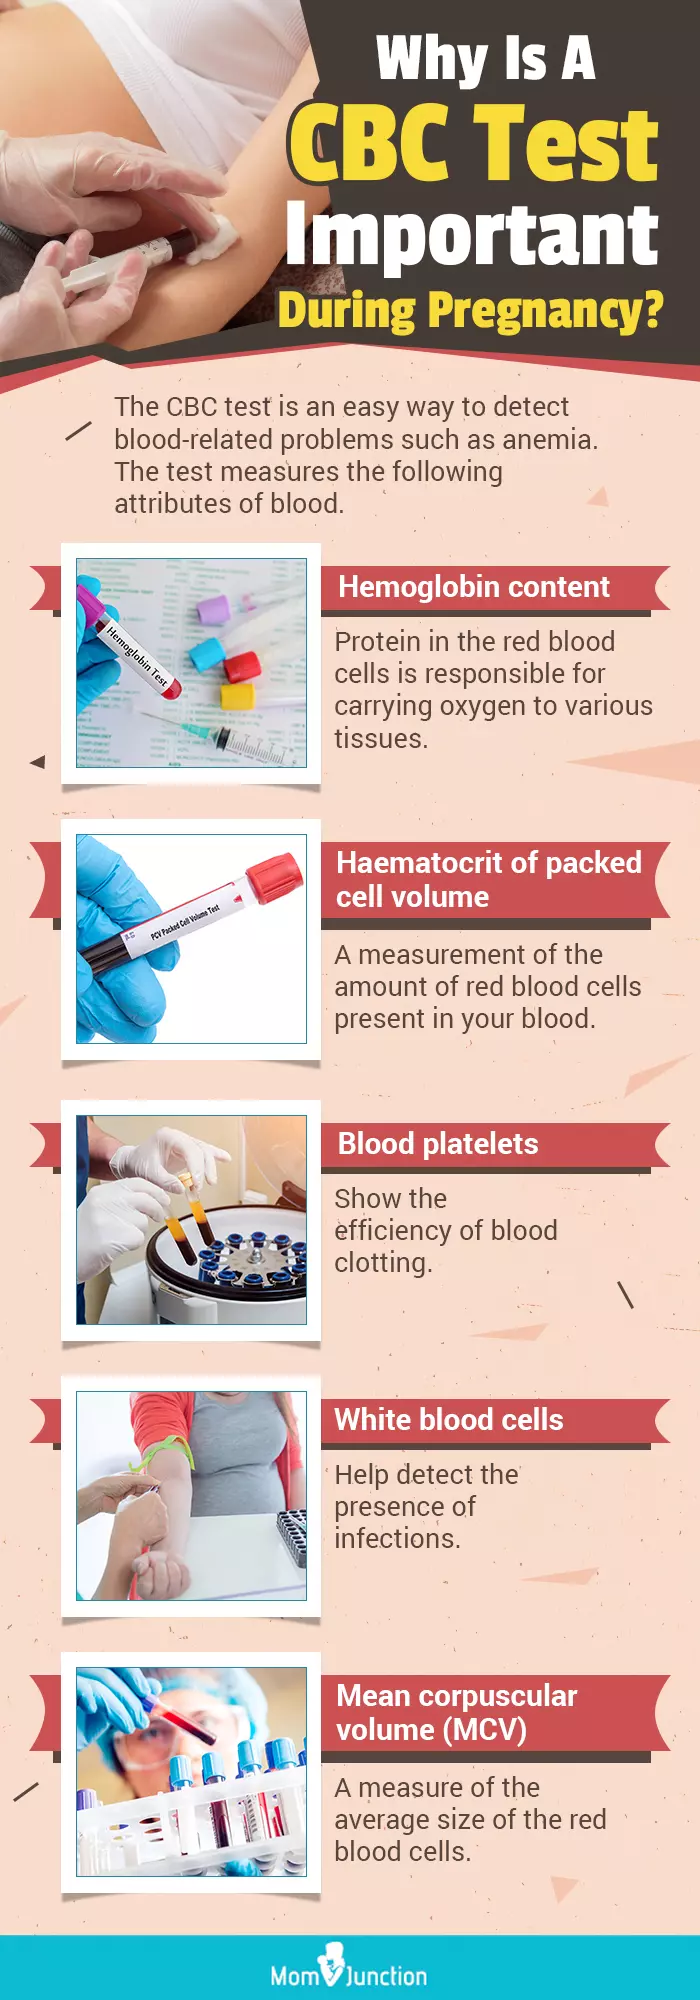 why is a cbc test important during pregnancy(infographic)